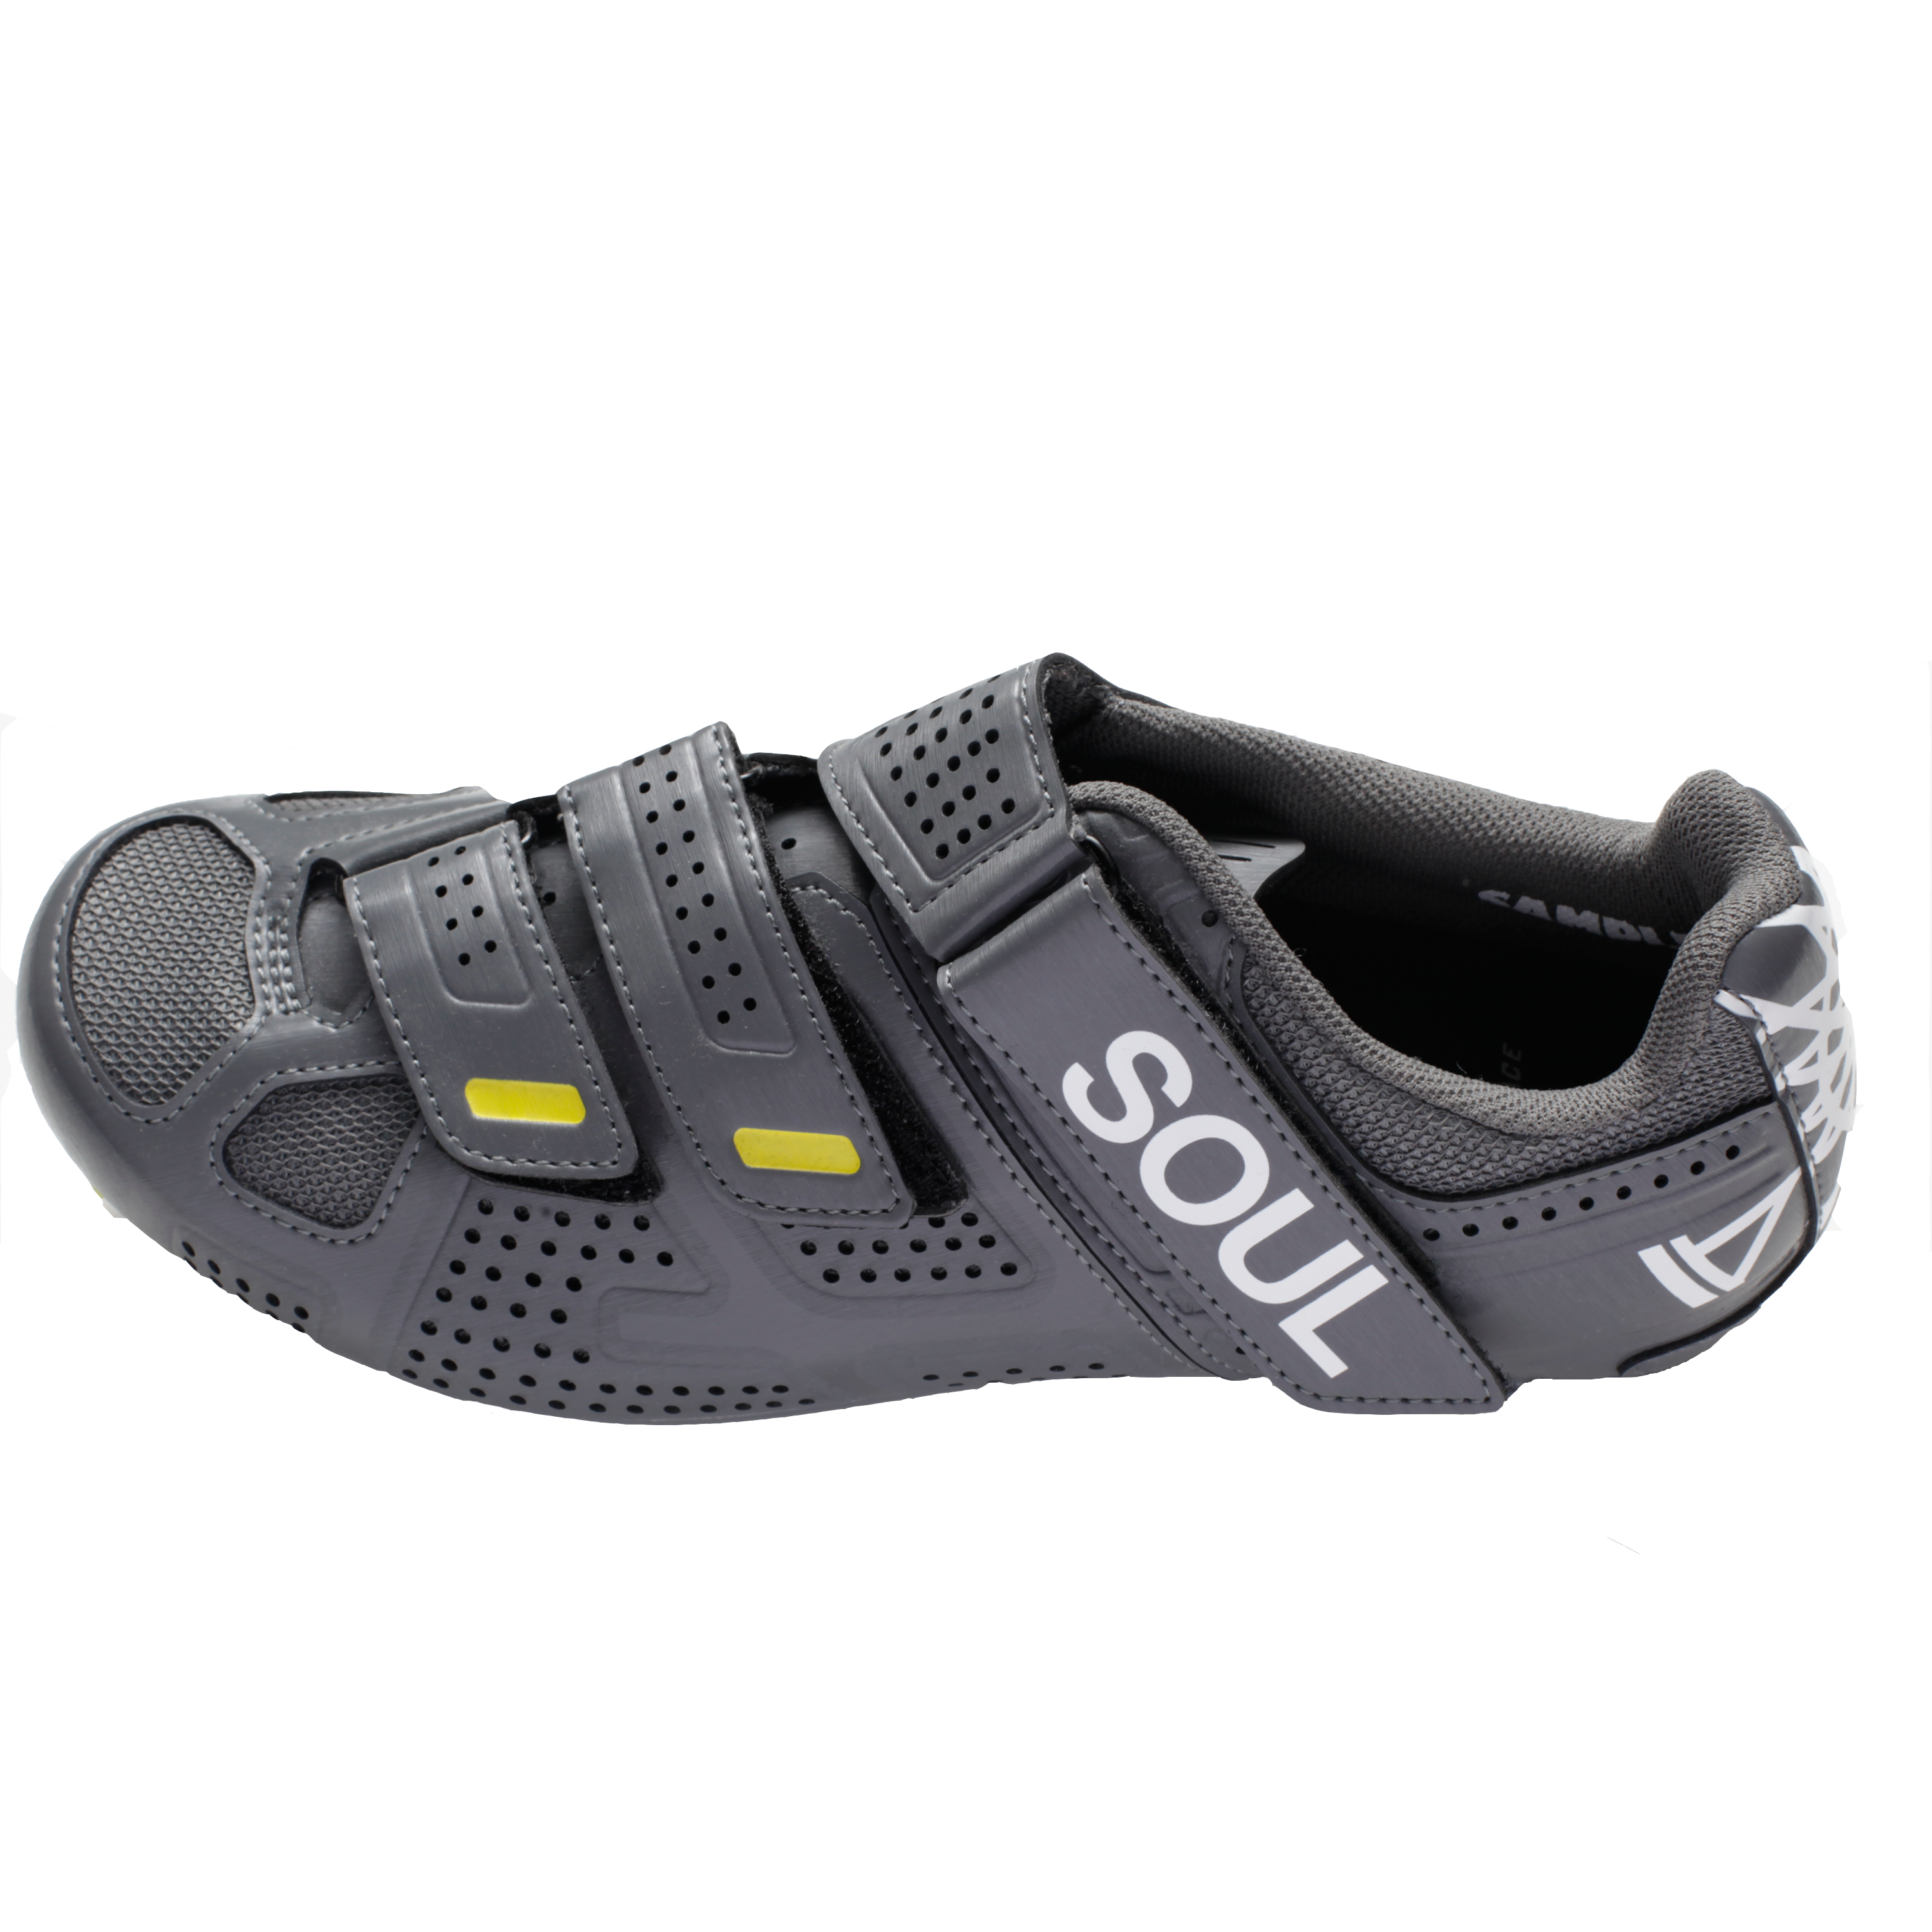 Soulcycle Shoe Size Chart